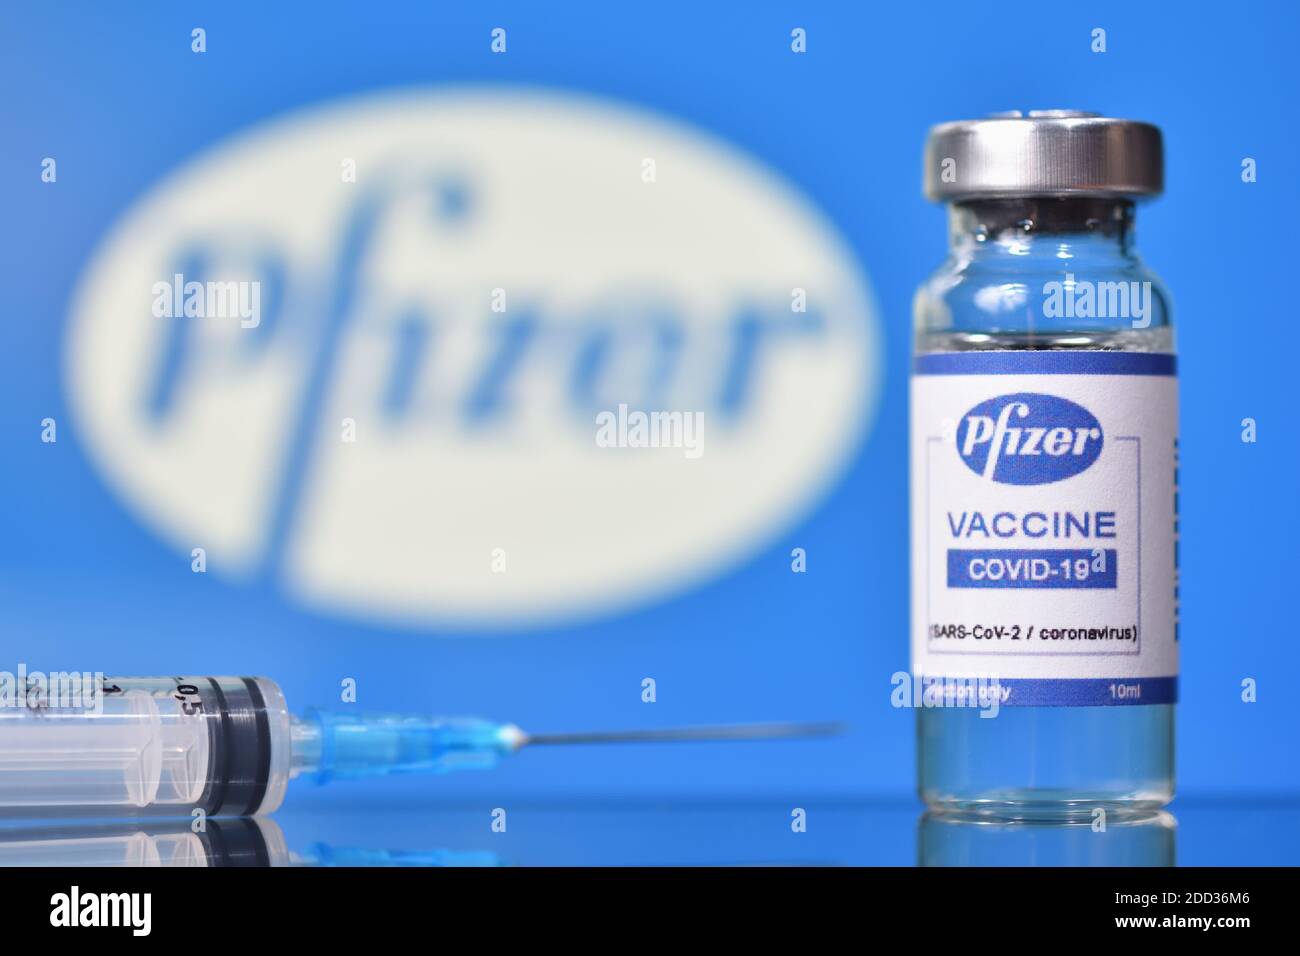 STARIY OSKOL, RUSSIA - NOVEMBER 23, 2020: Pfizer and biontech announced the creation of a vaccine to prevent COVID-19 Stock Photo